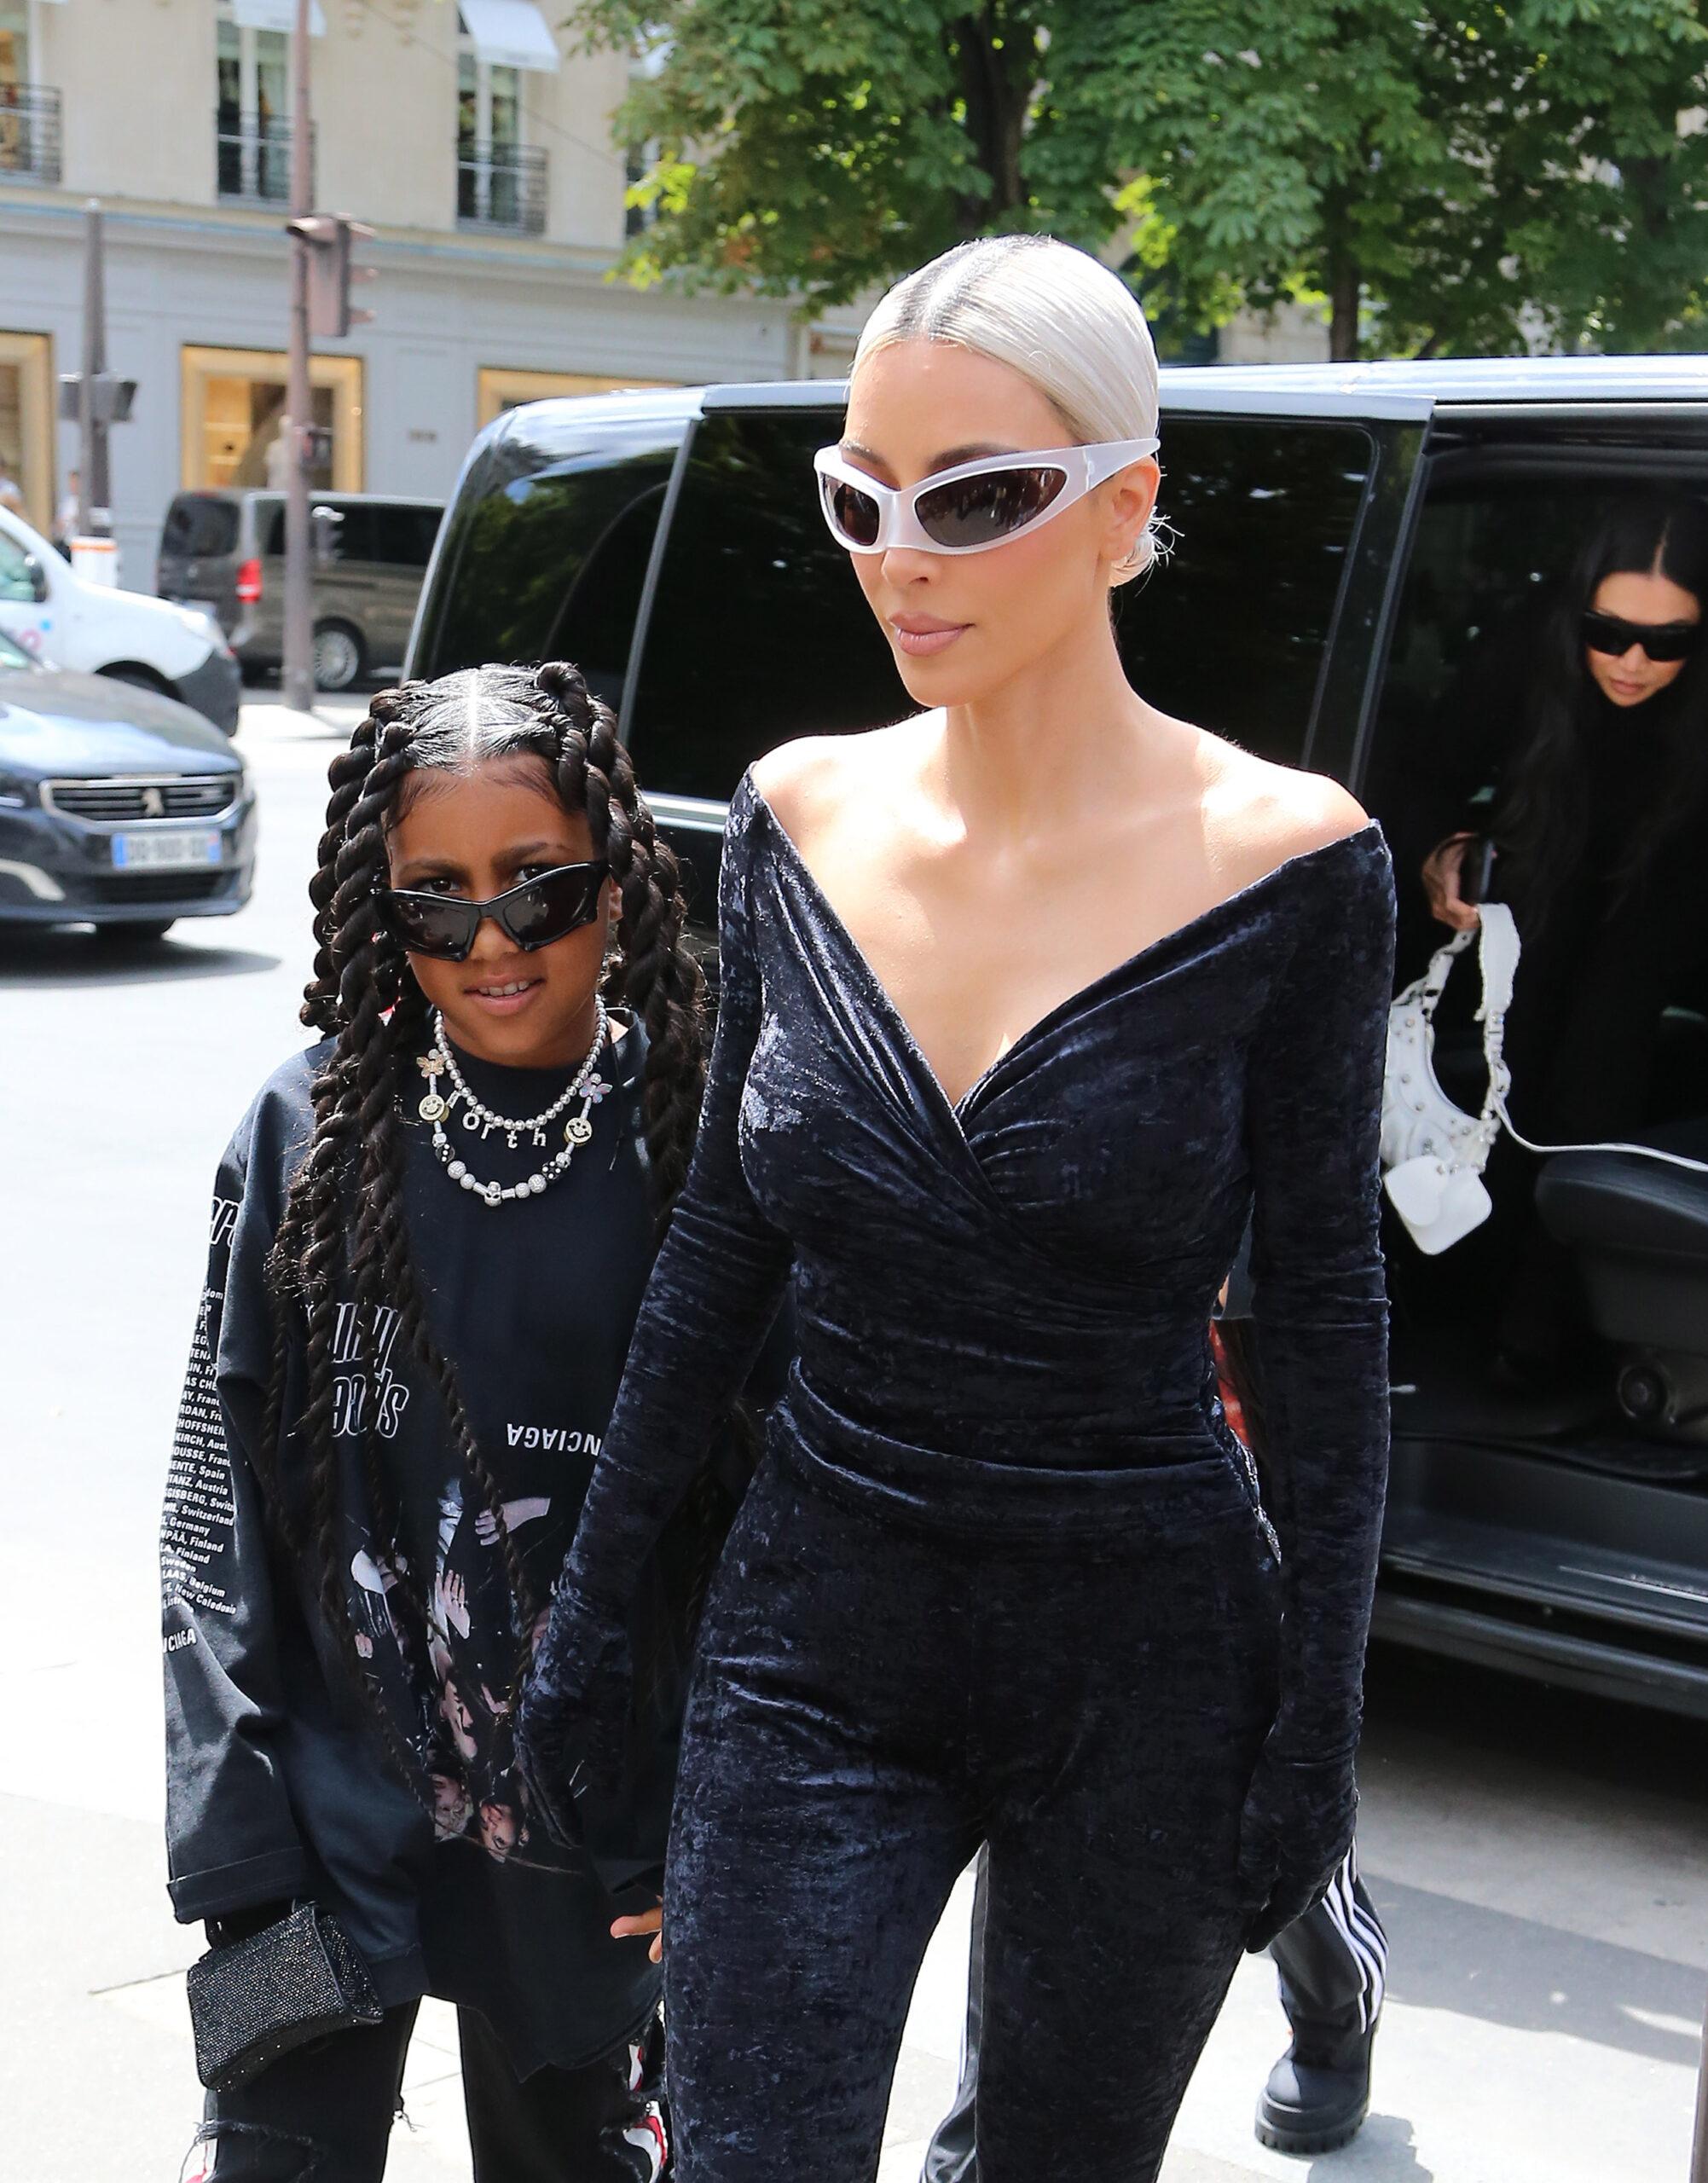 Kim Kardashian and North West go to lunch at L'AVENUE restaurant